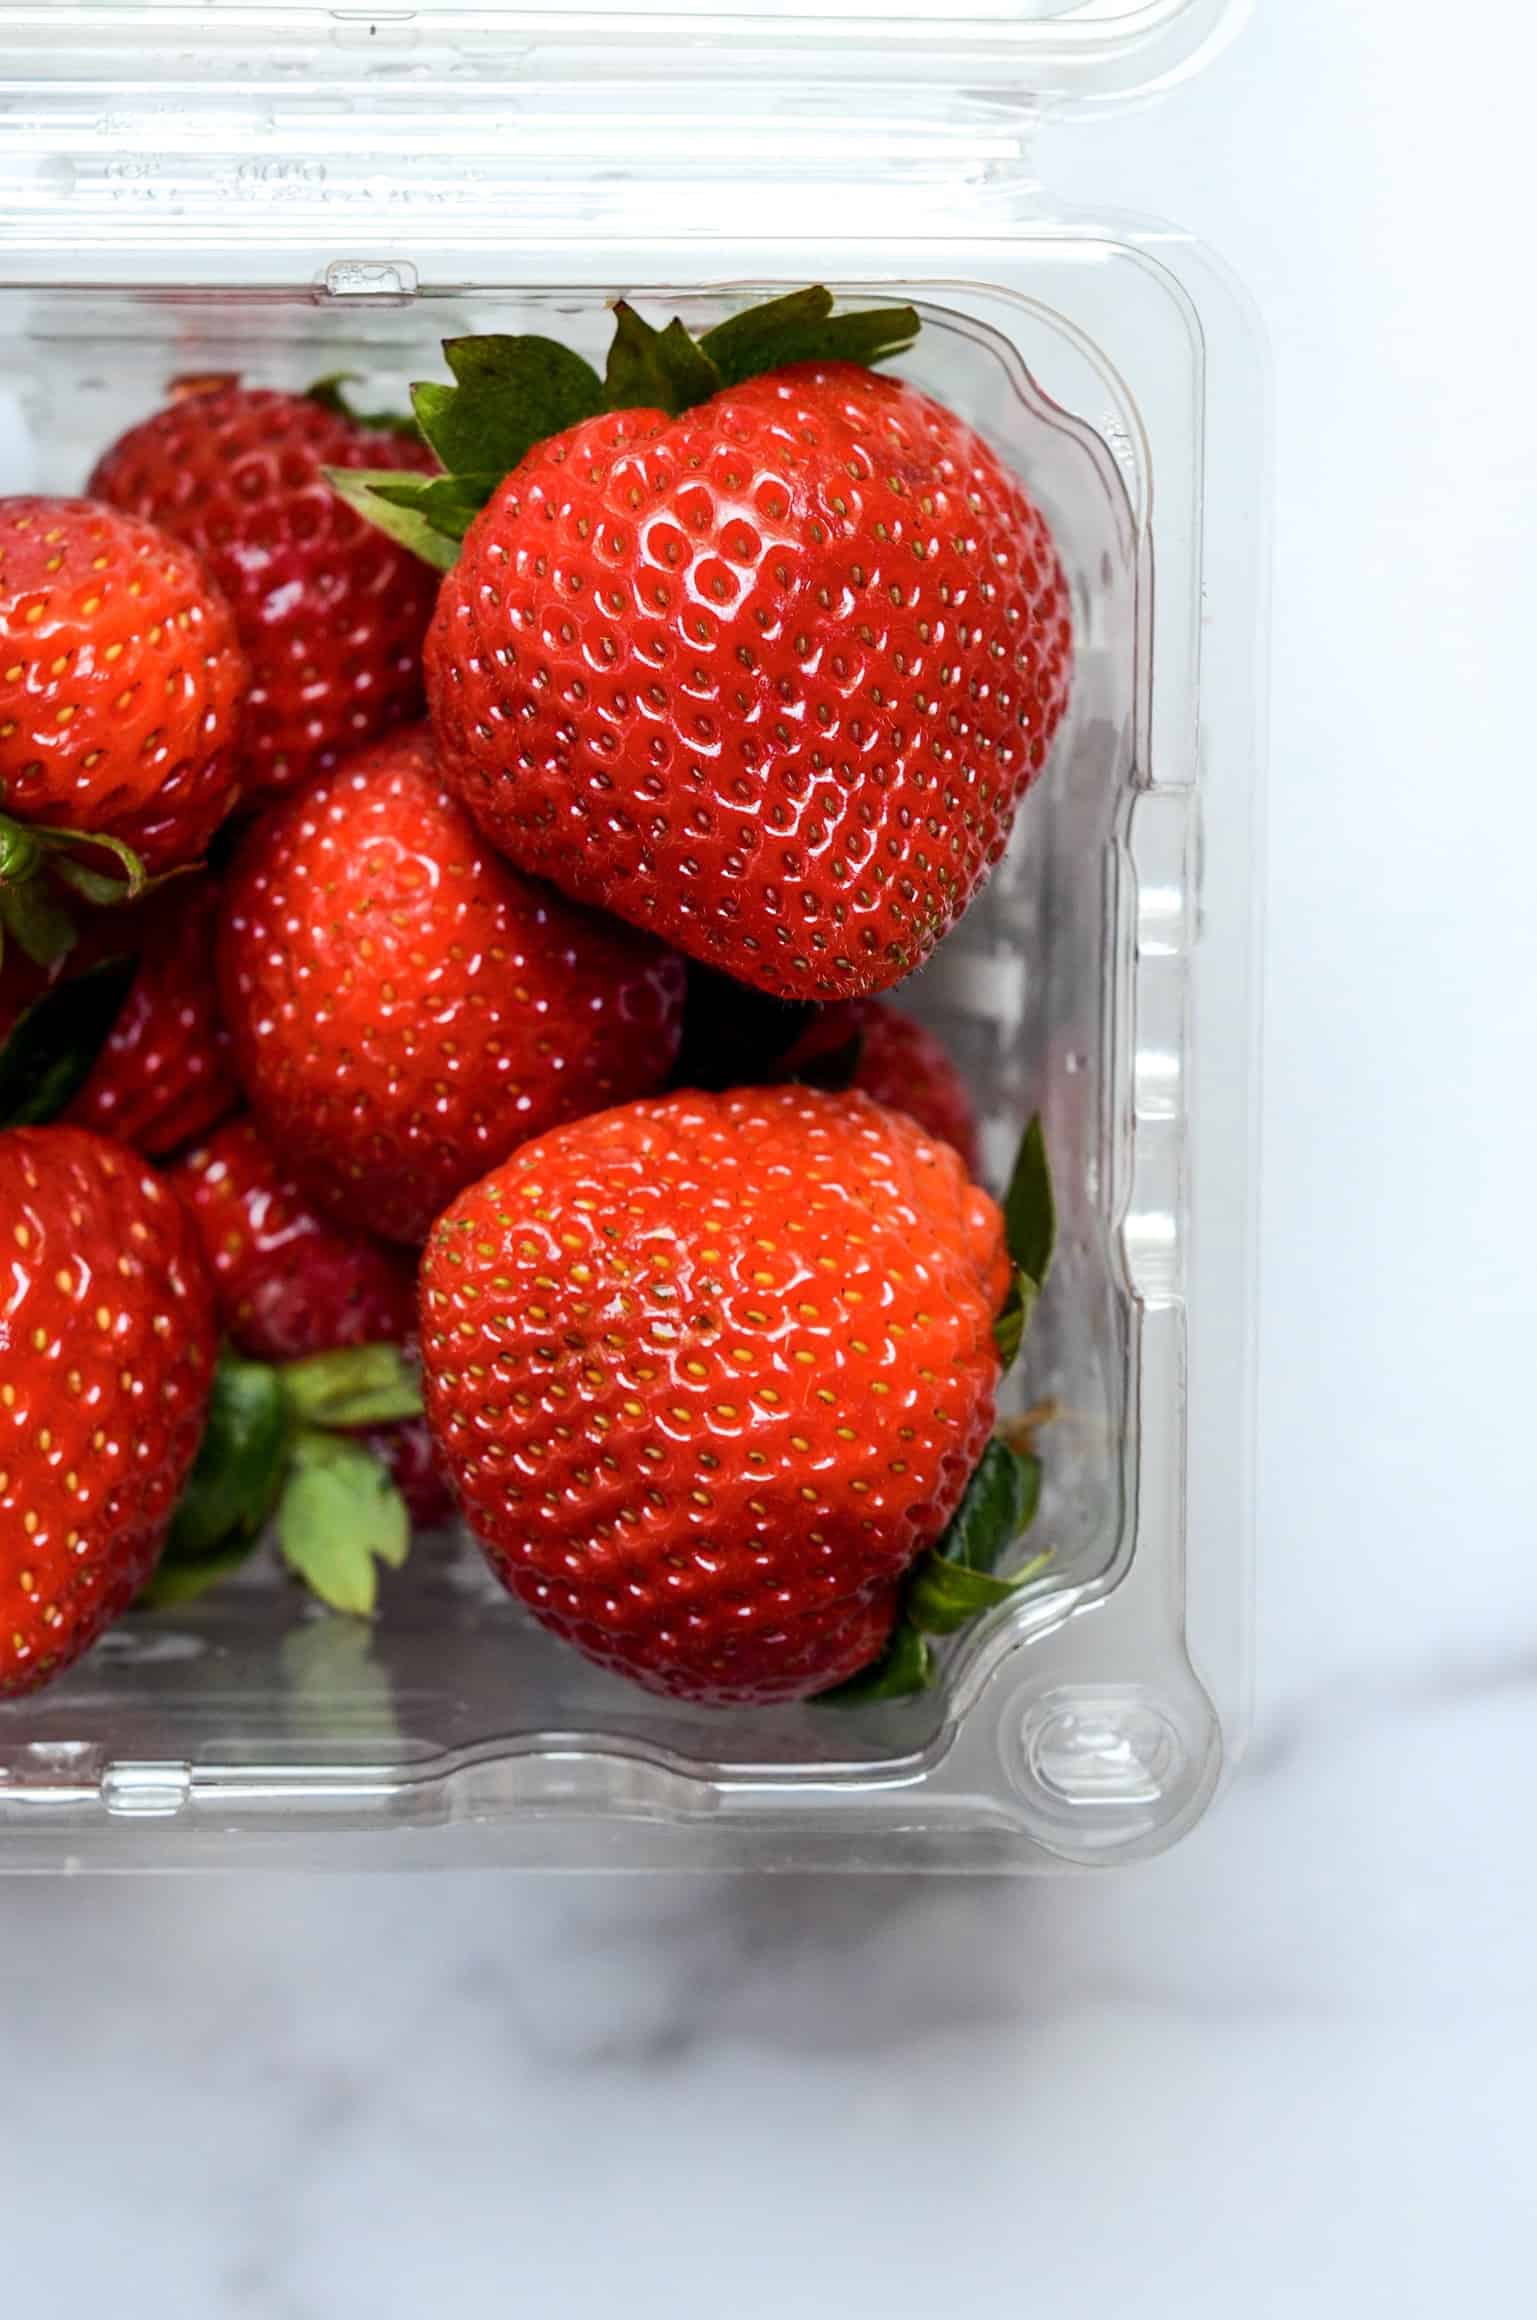 up close and personal with strawberries